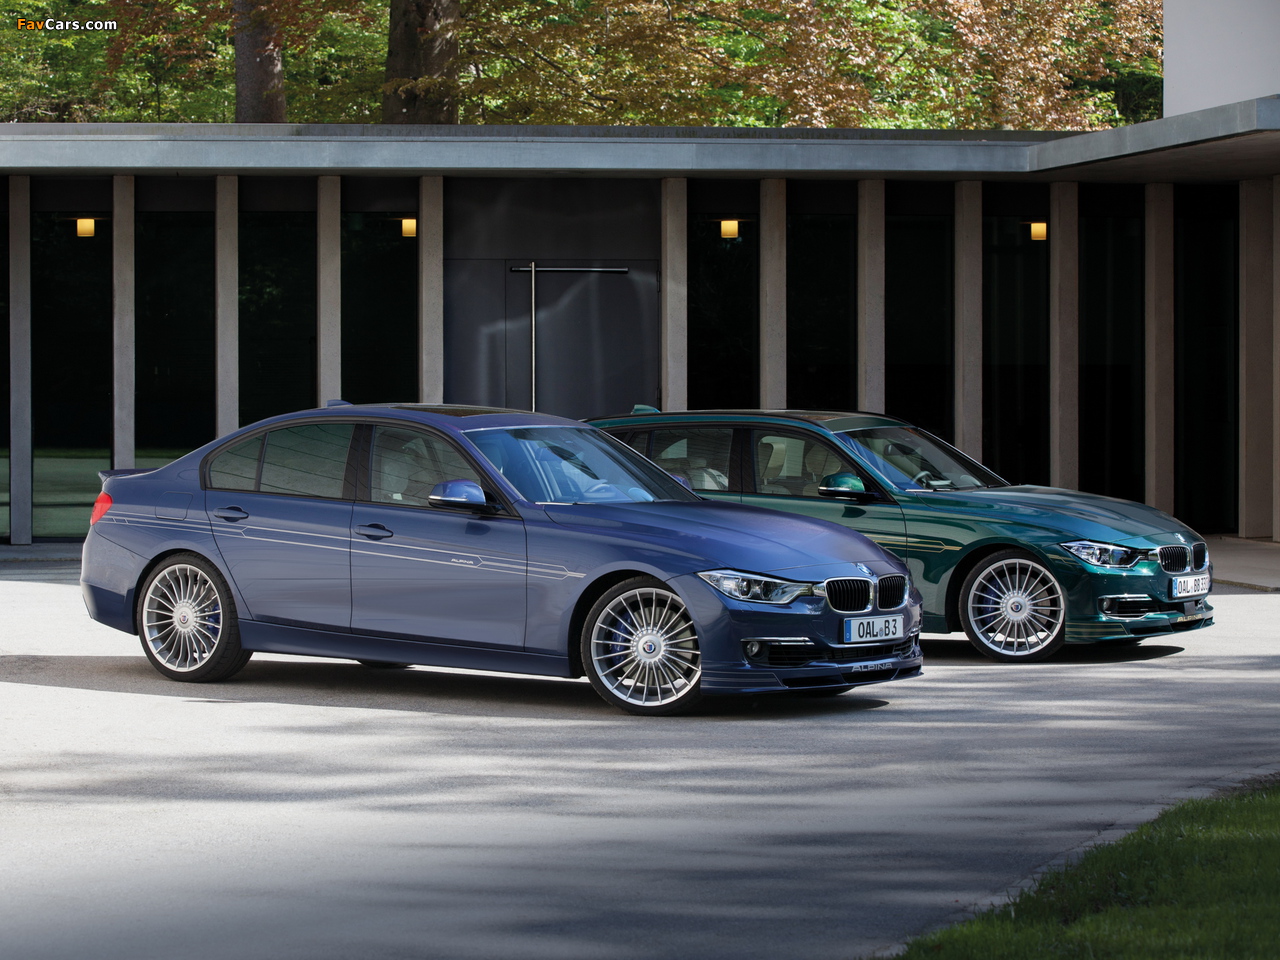 Pictures of Alpina BMW 3 Series (1280 x 960)